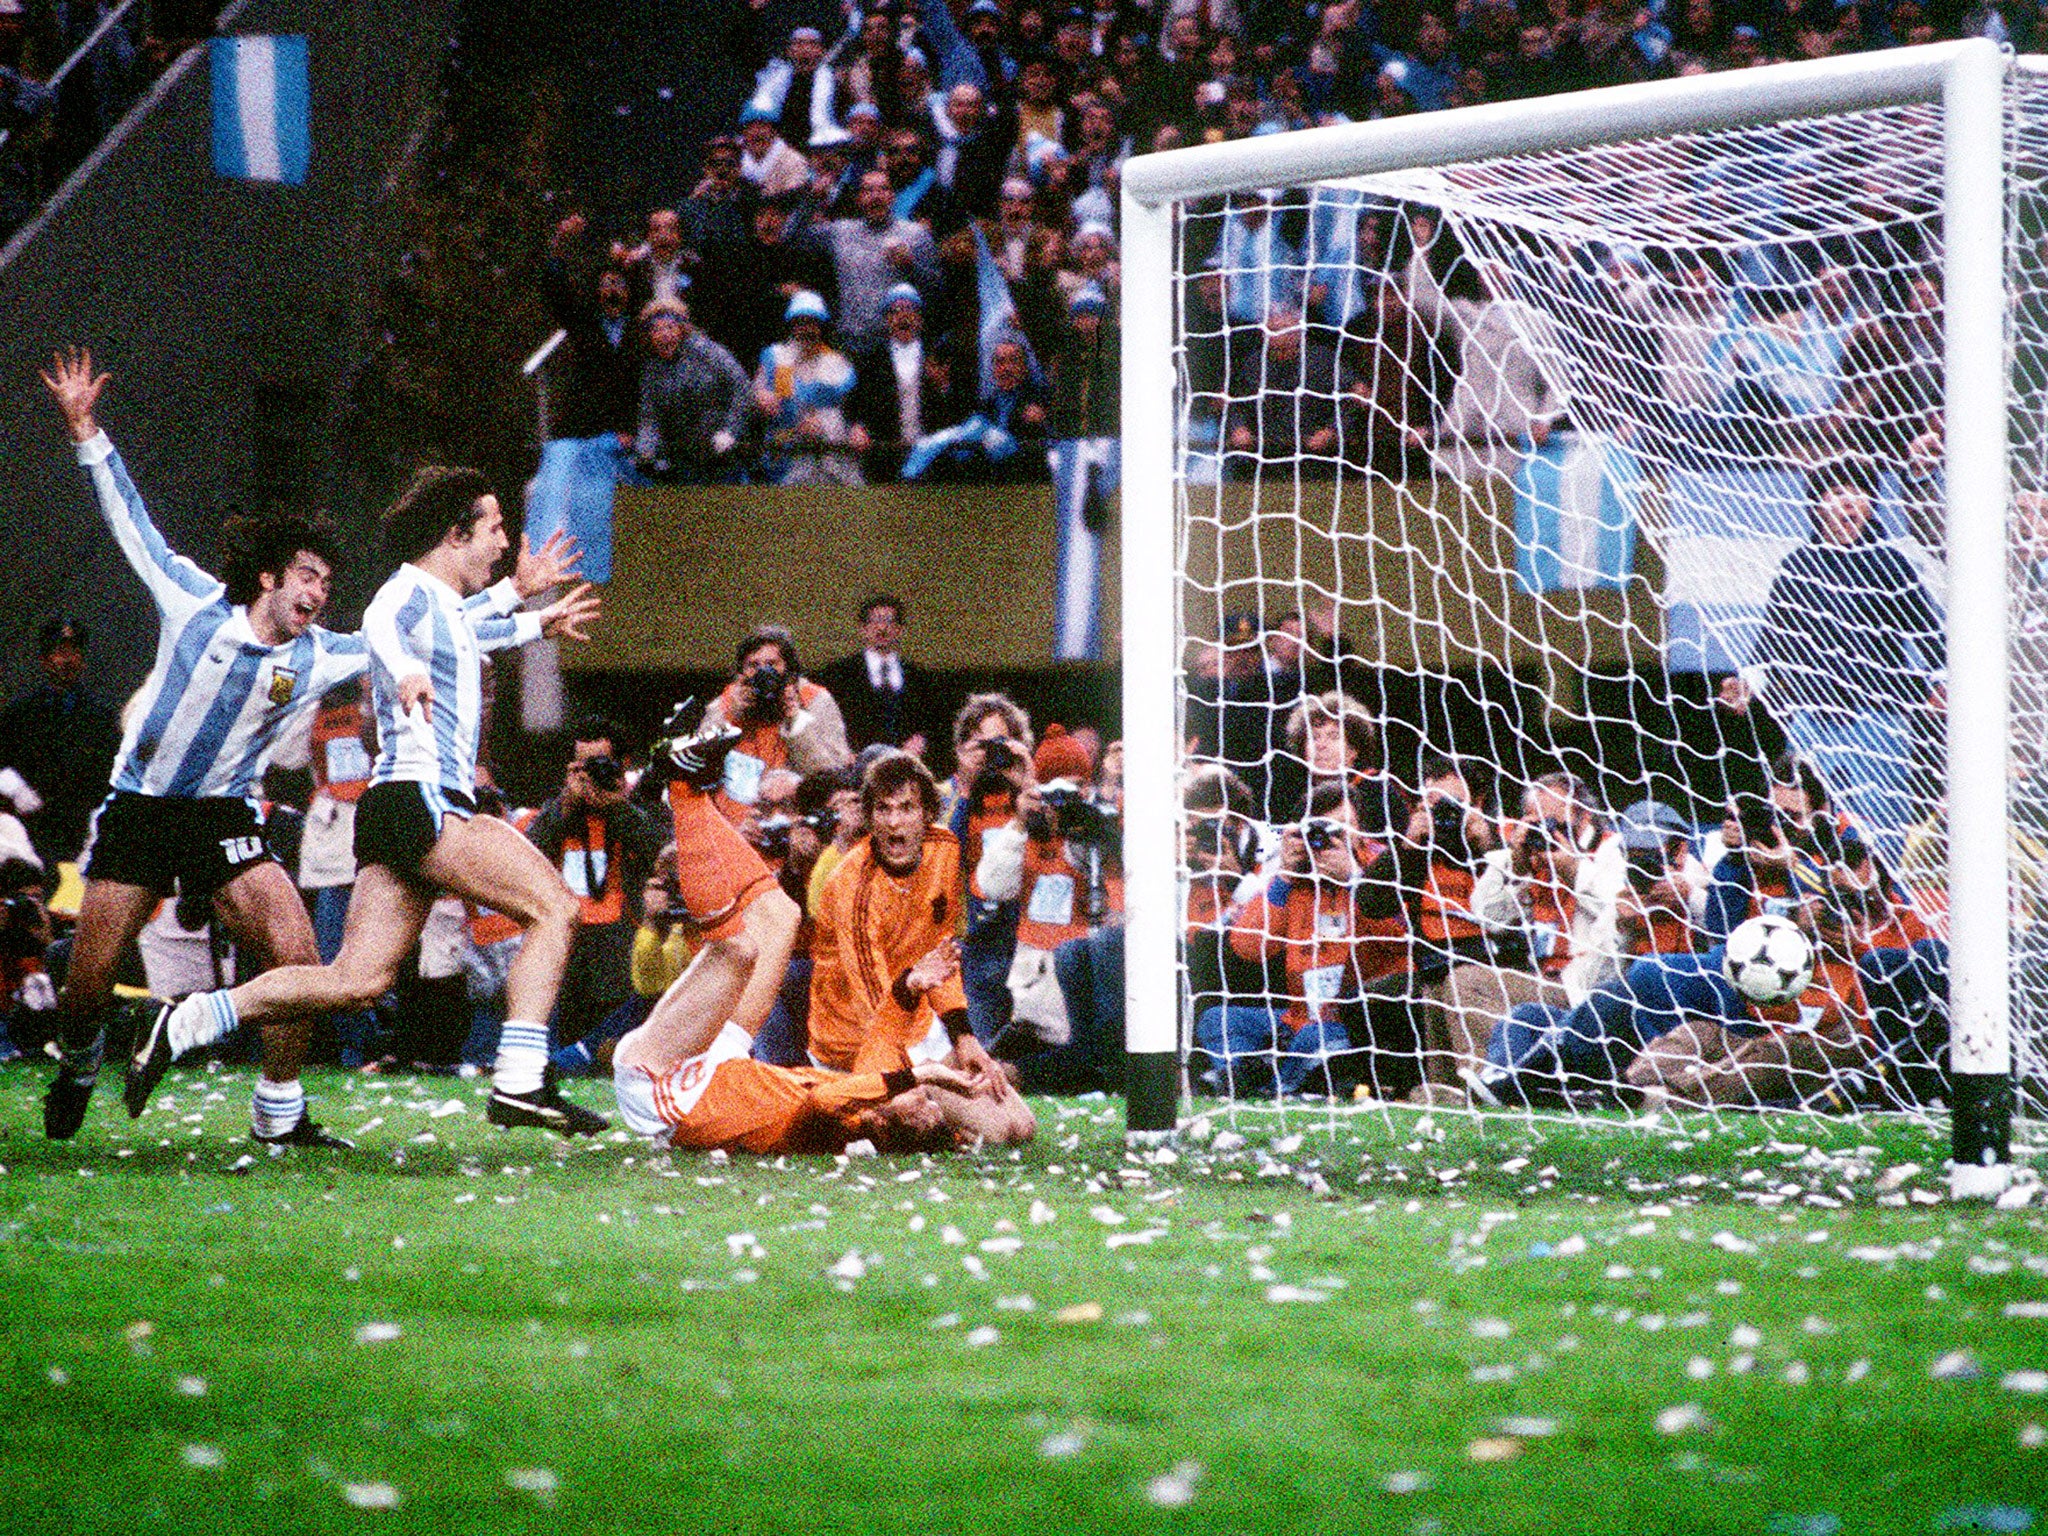 Mario Kempes scores for Argentina in the 1978 World Cup final